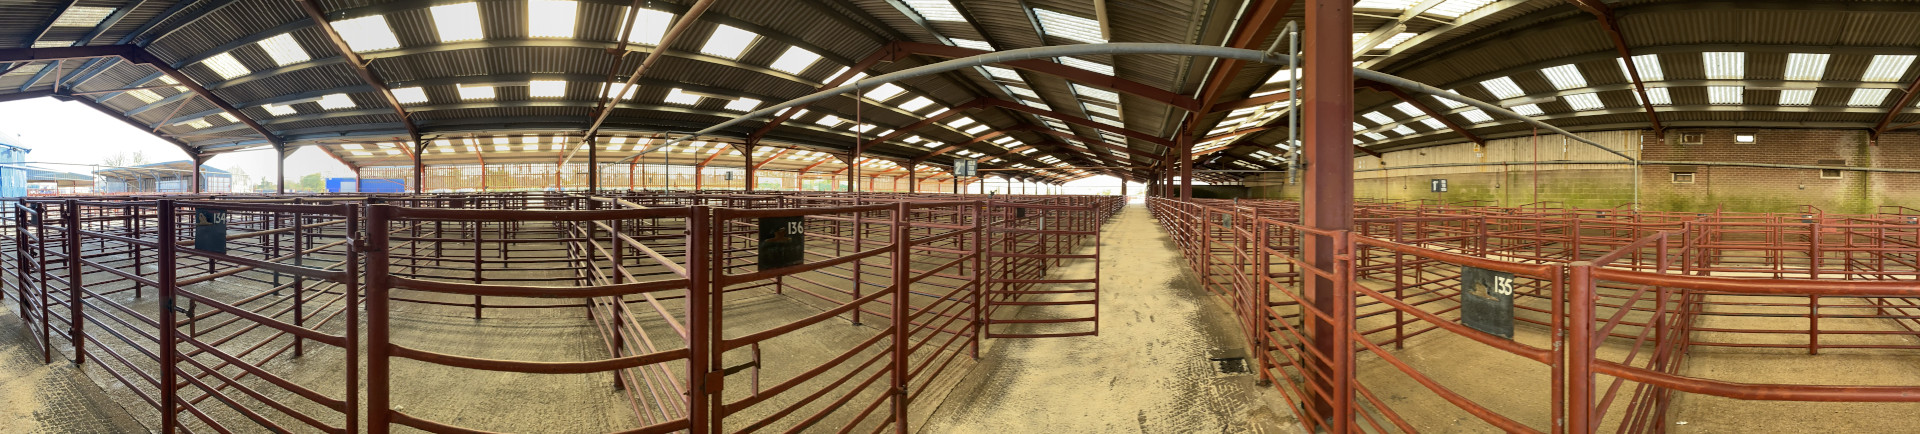 Panoramic view of the wide expanse of iron gated pens.